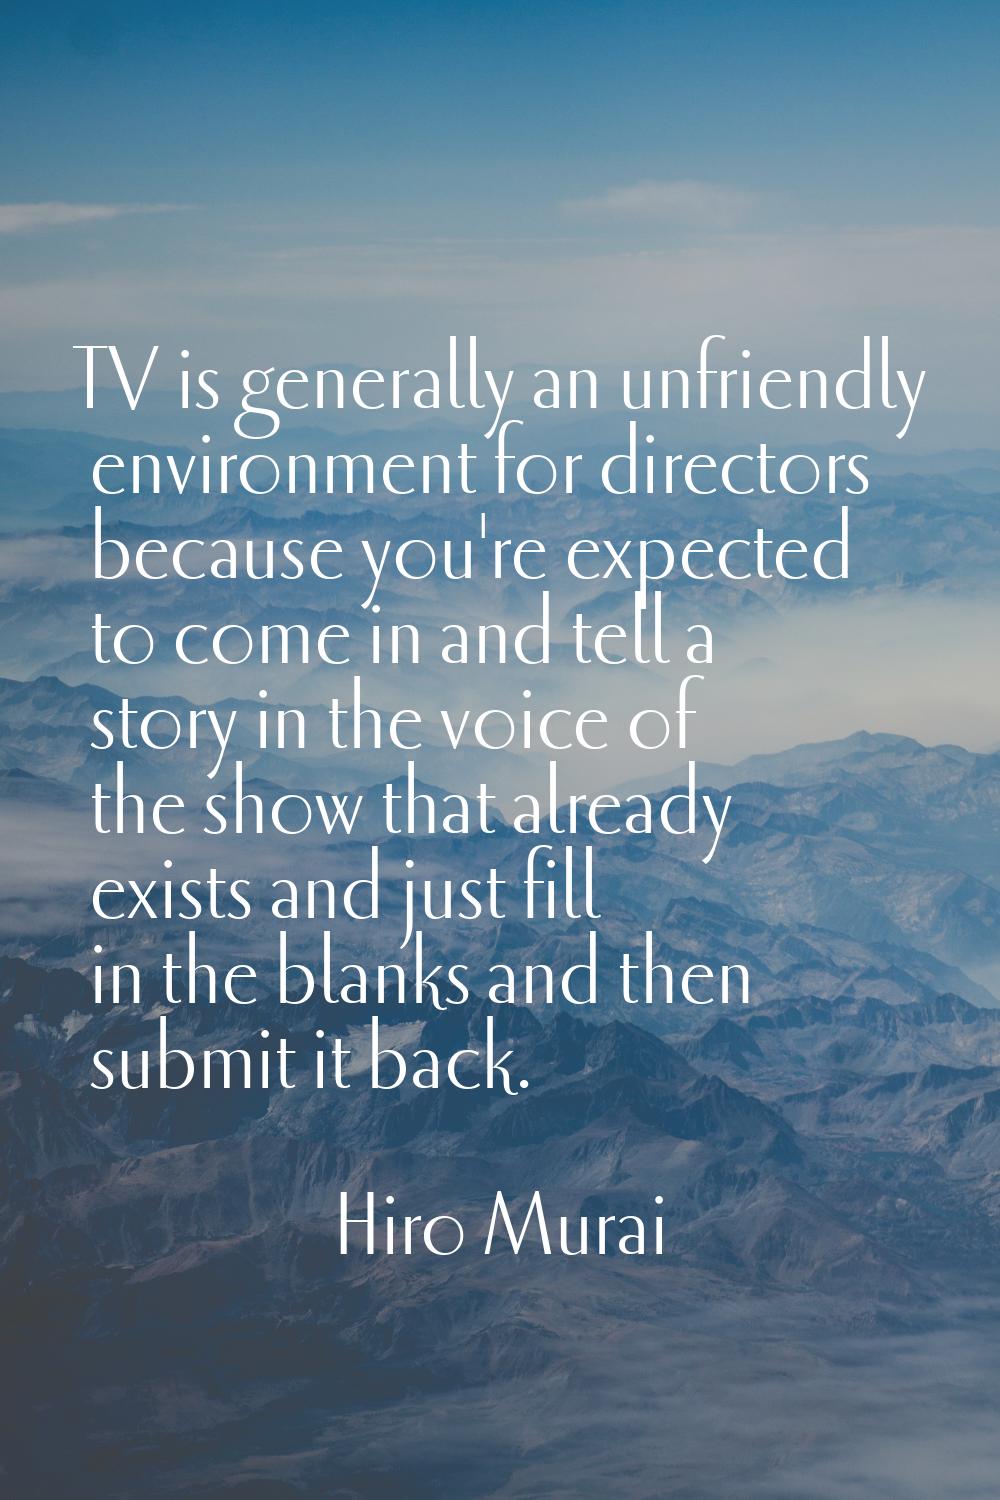 TV is generally an unfriendly environment for directors because you're expected to come in and tell